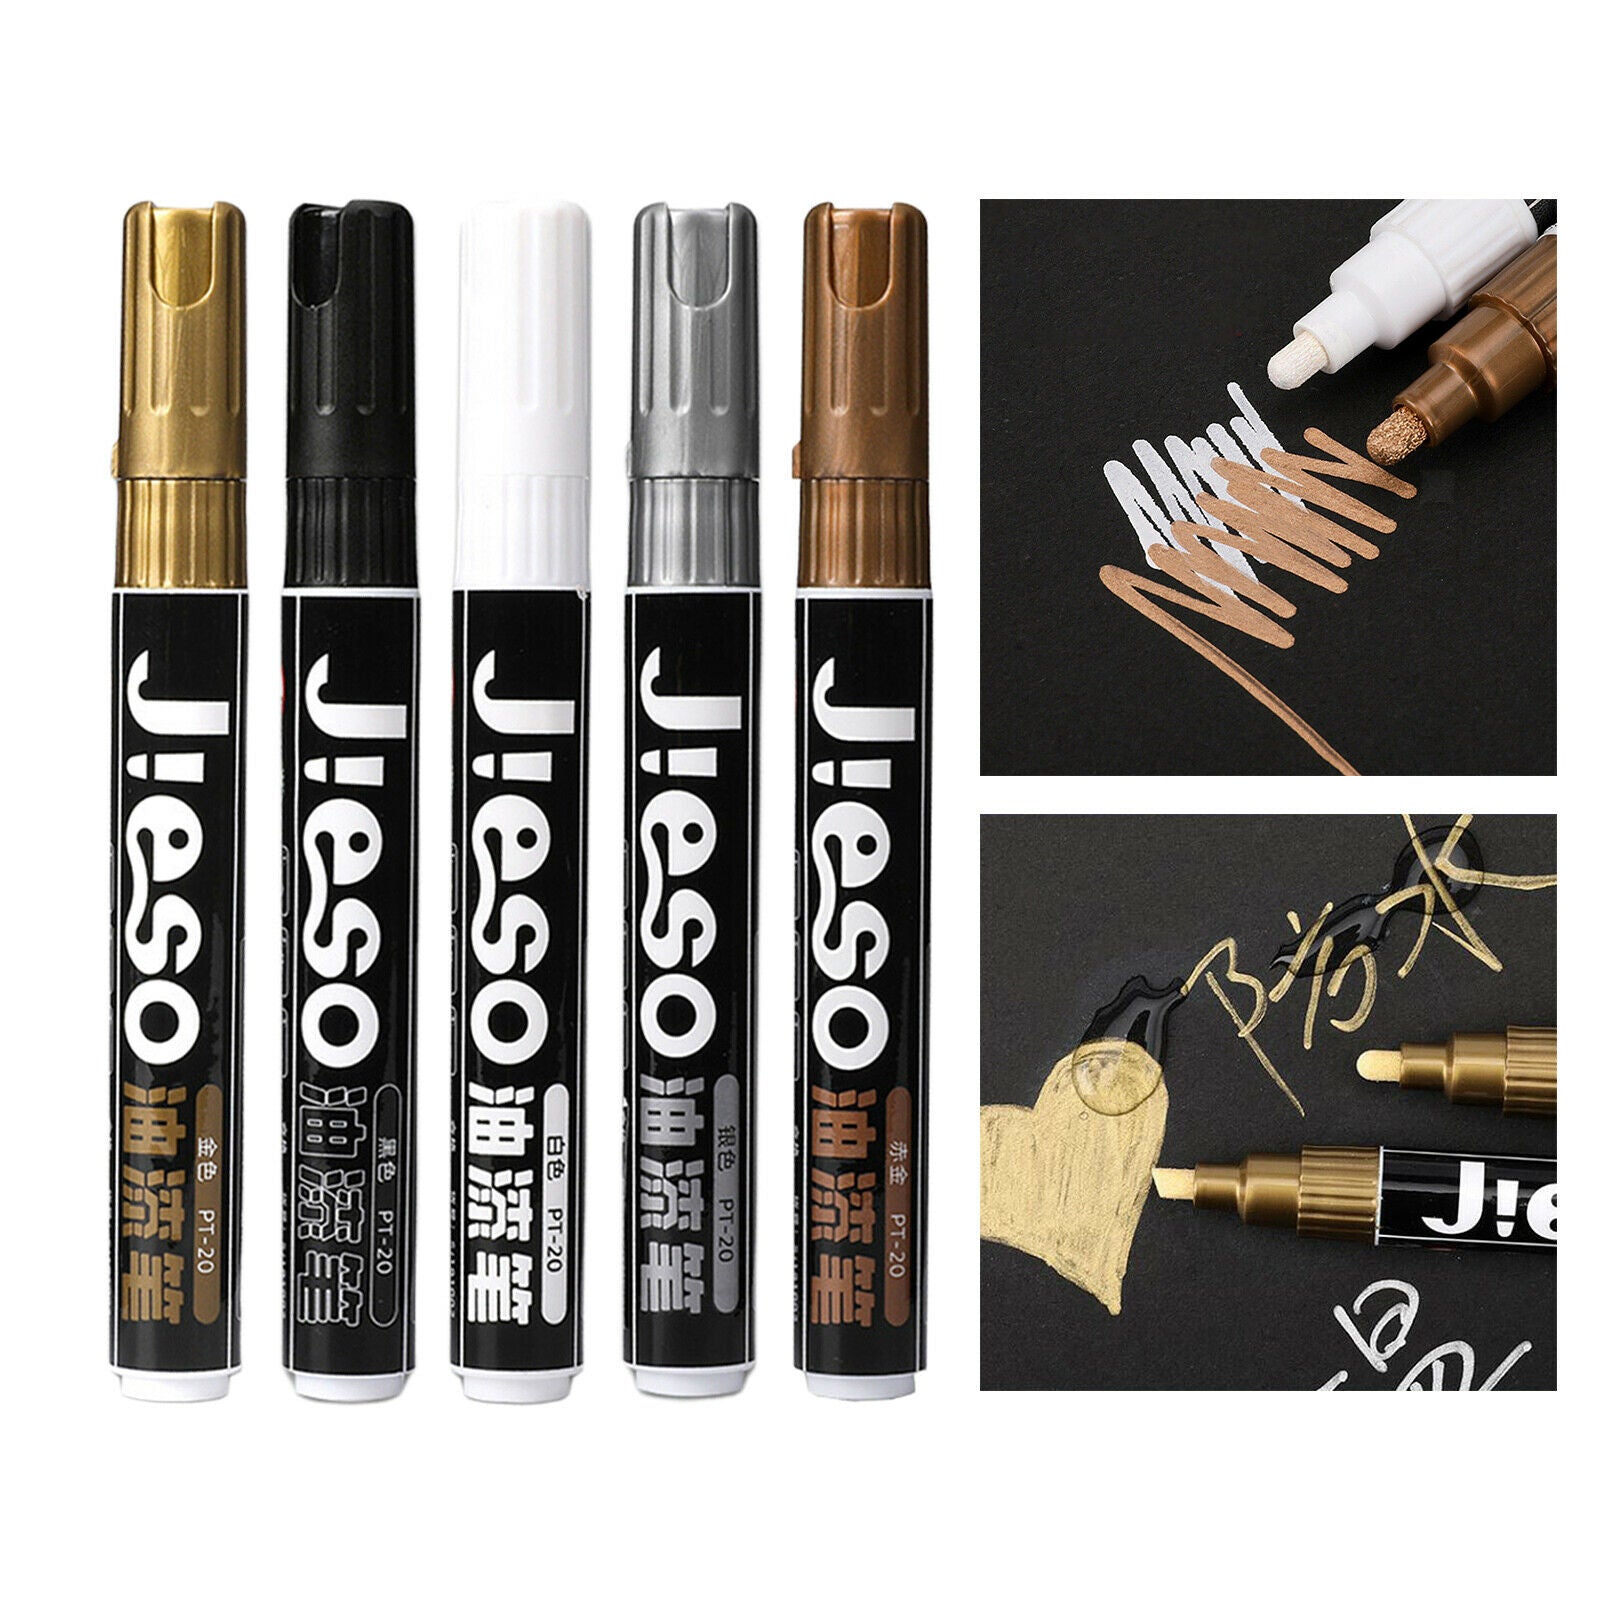 5x Metallic Marker Pens Oil Based Paint for DIY Ceramic Painting Art Crafts